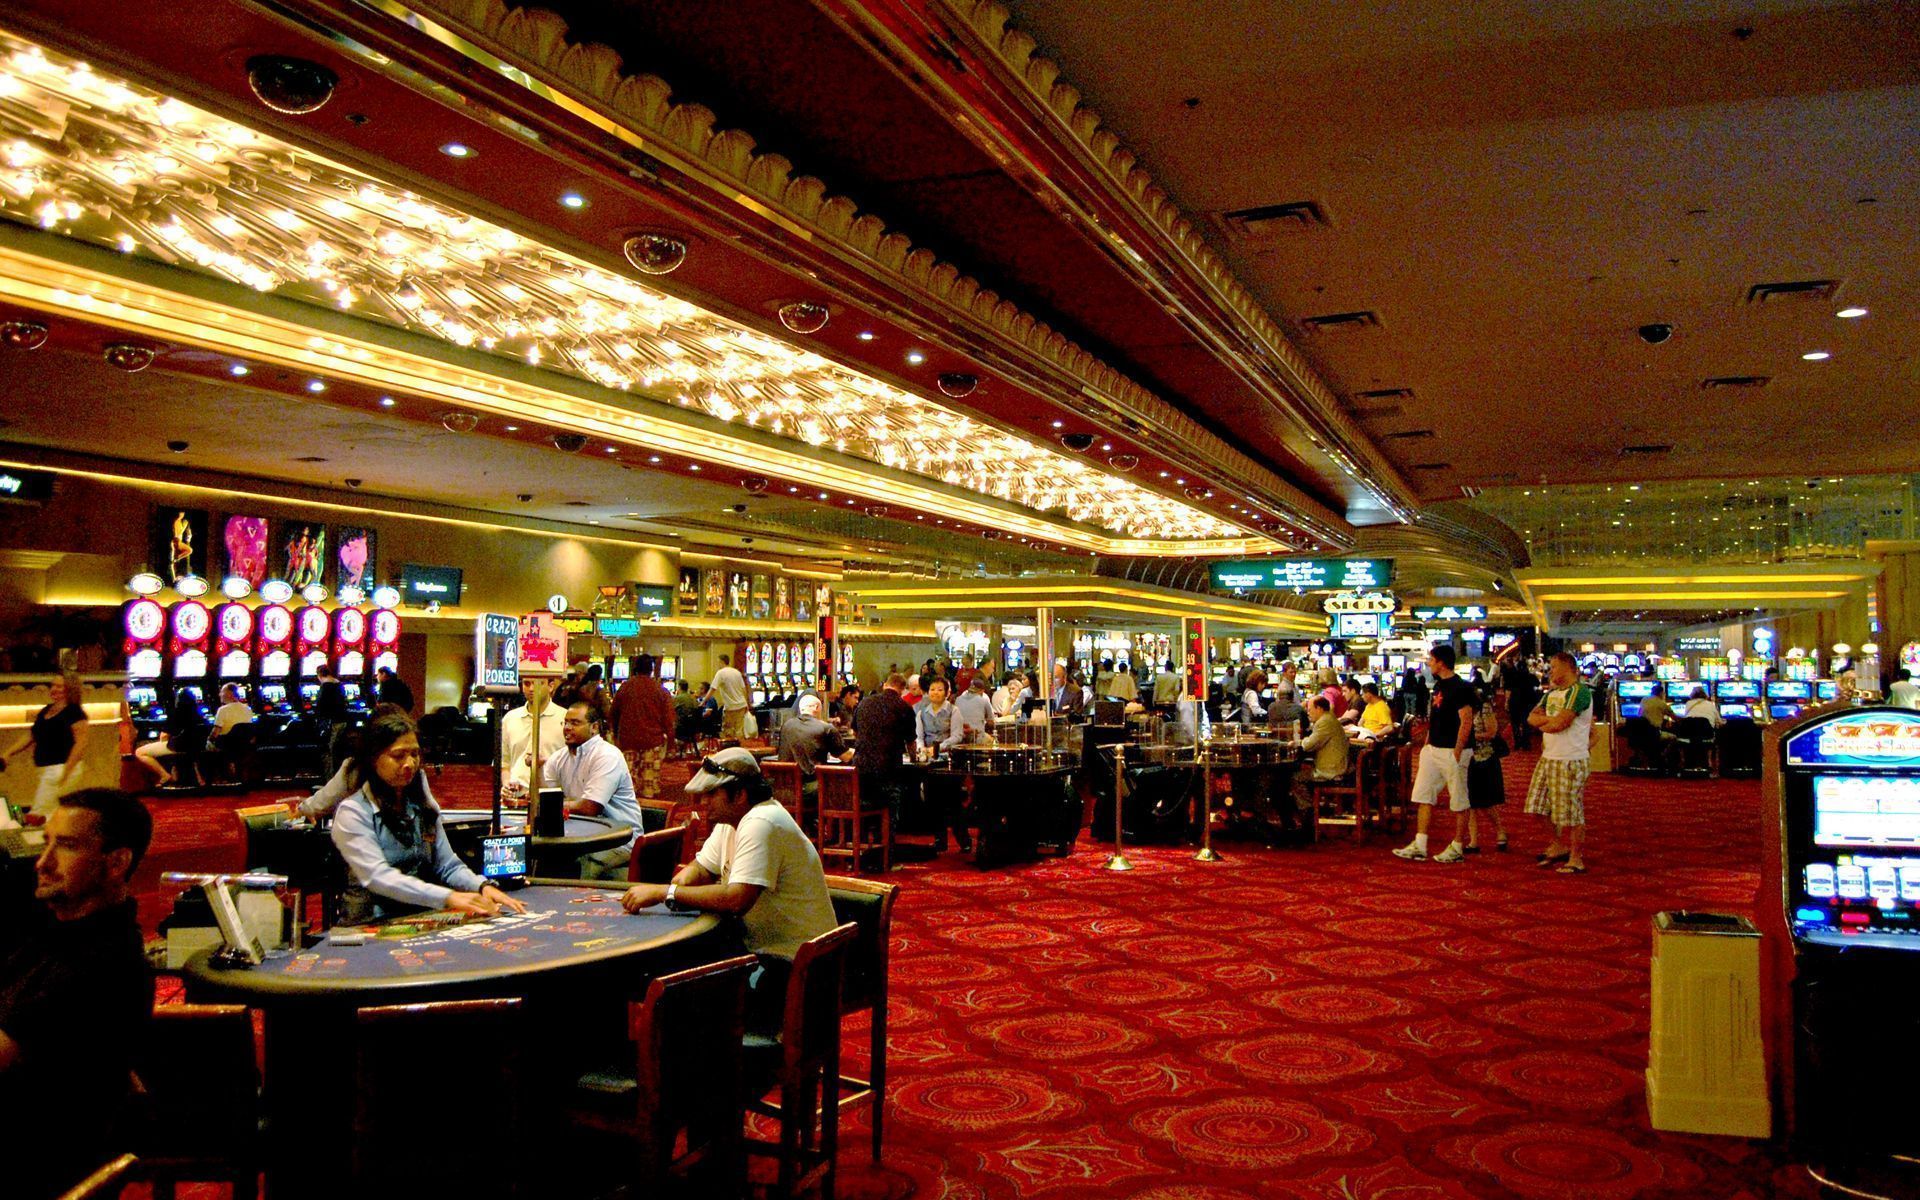 The Royal Treatment: Welcome to Baccarat Casino